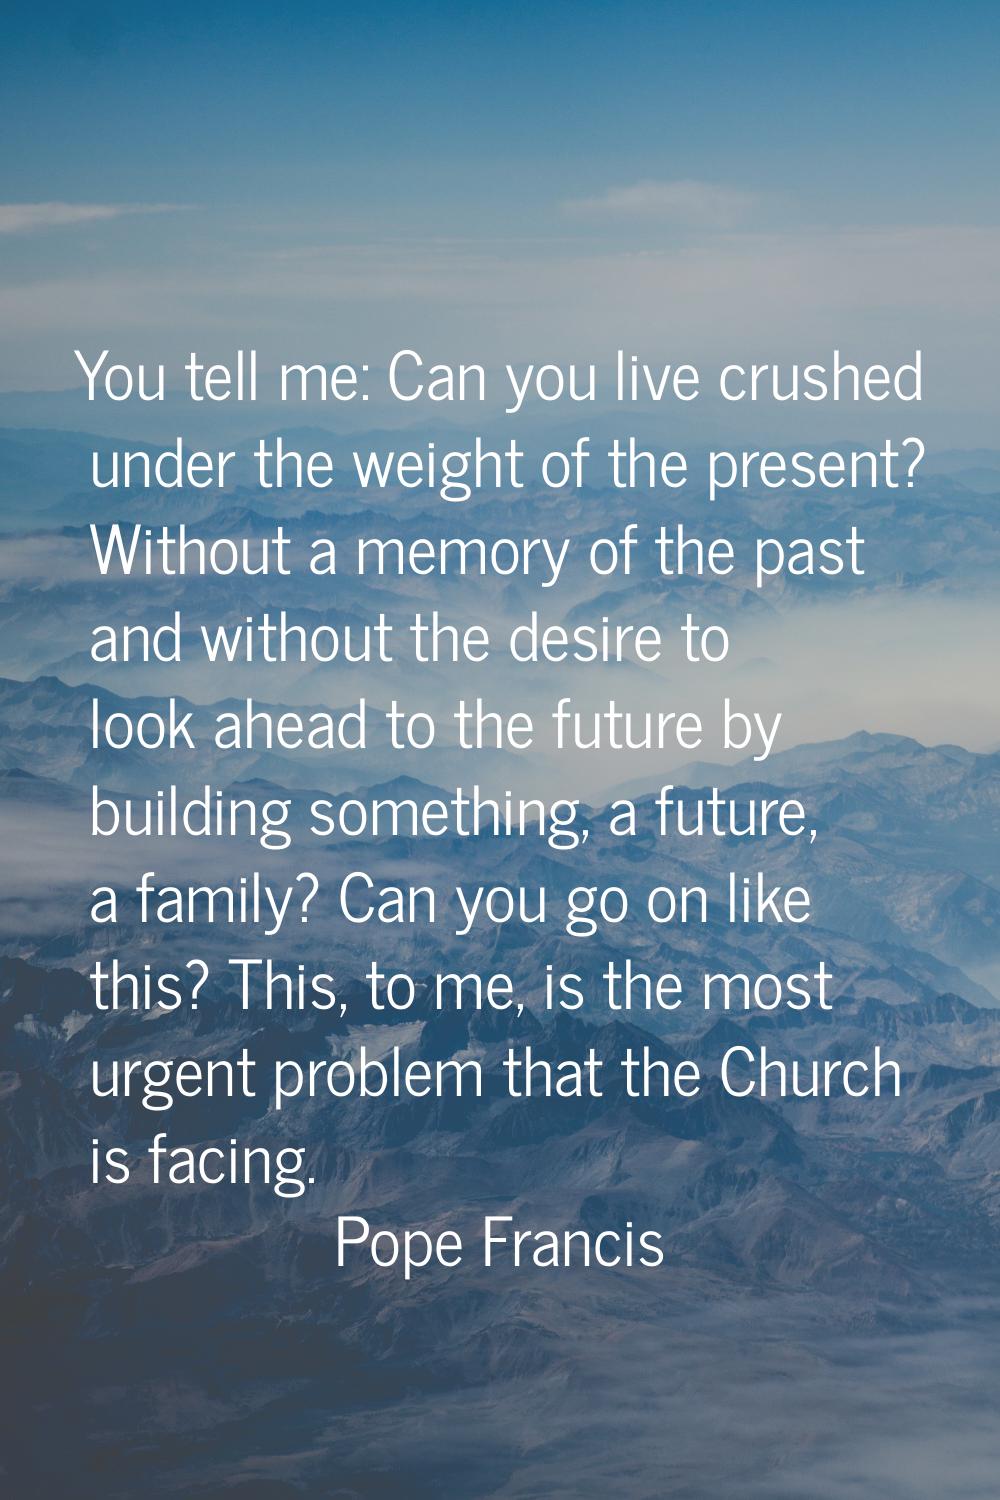 You tell me: Can you live crushed under the weight of the present? Without a memory of the past and